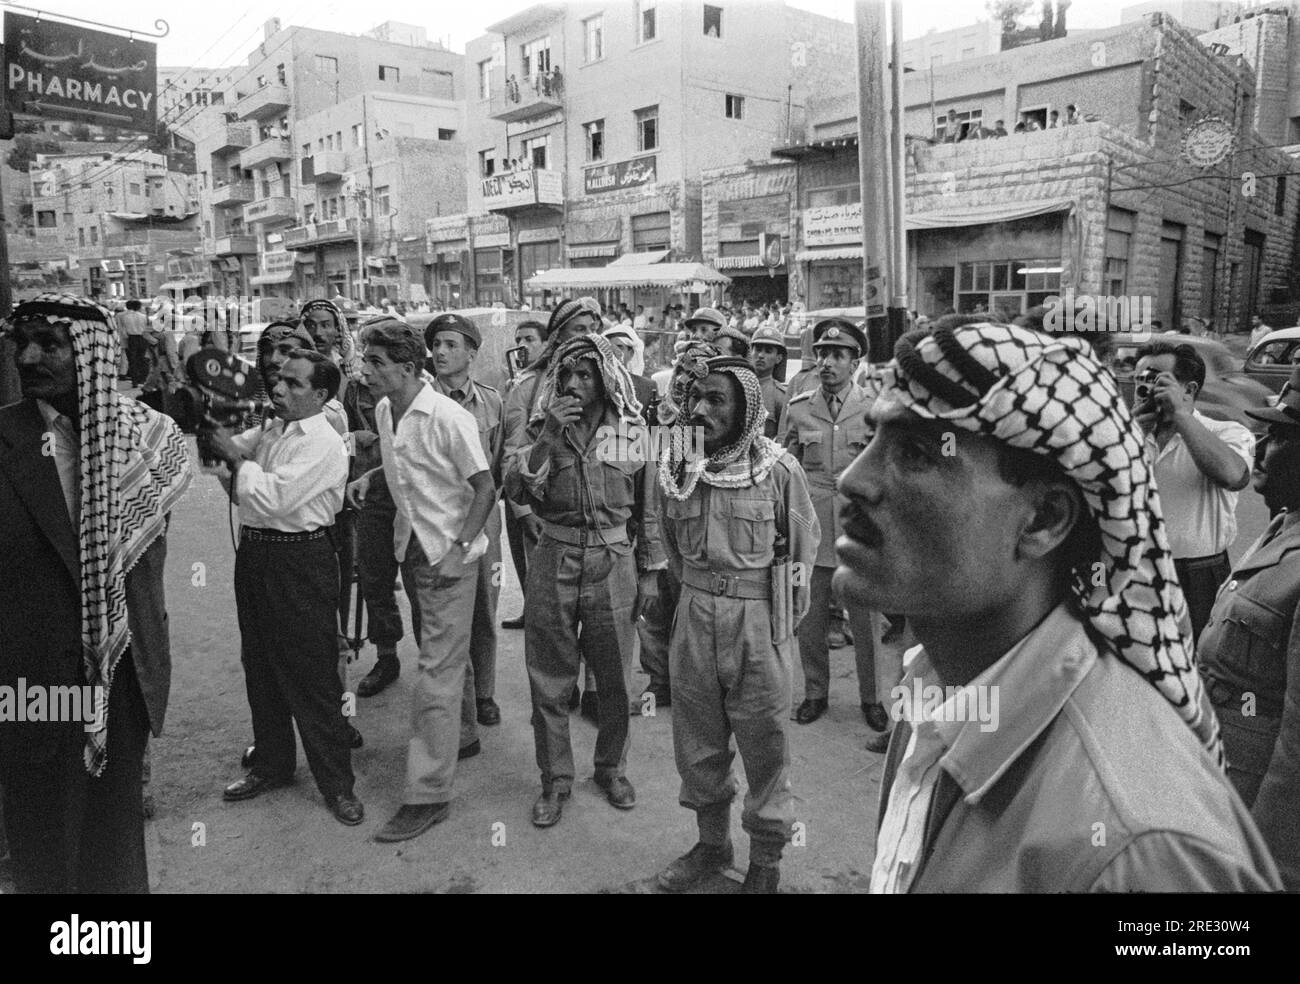 Amman, Jordan:  July, 1958 Men and soldiers gathered on a street intently watching something in a storefront window, possibly news reports of the overthrow of King Faissal by Saddam Hussein  in neighboring Iraq. Stock Photo